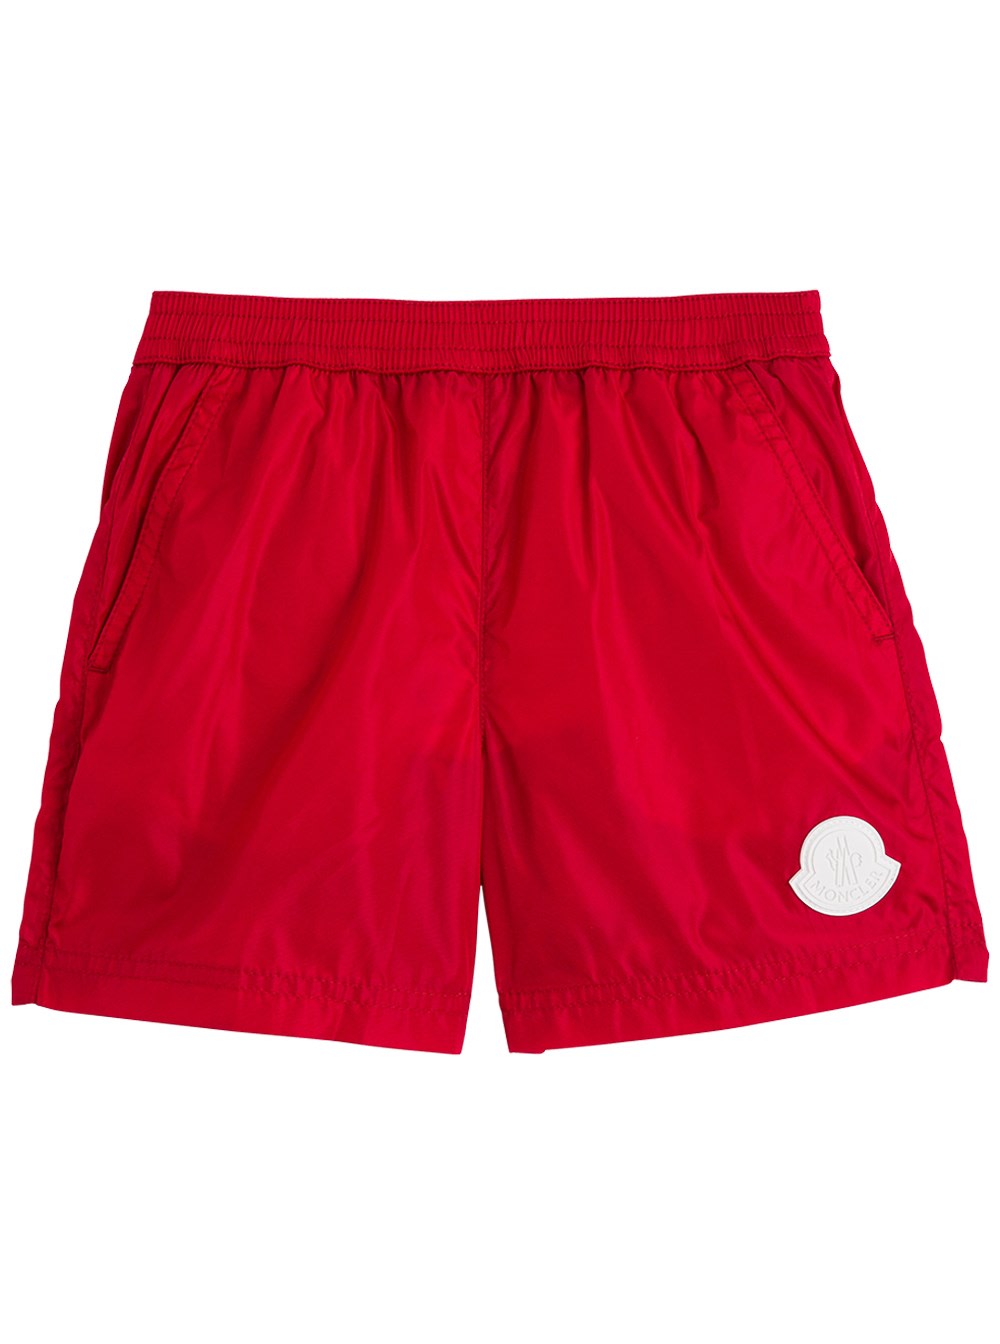 MONCLER RED SWIM SHORTS WITH LOGO PATCH,11800573